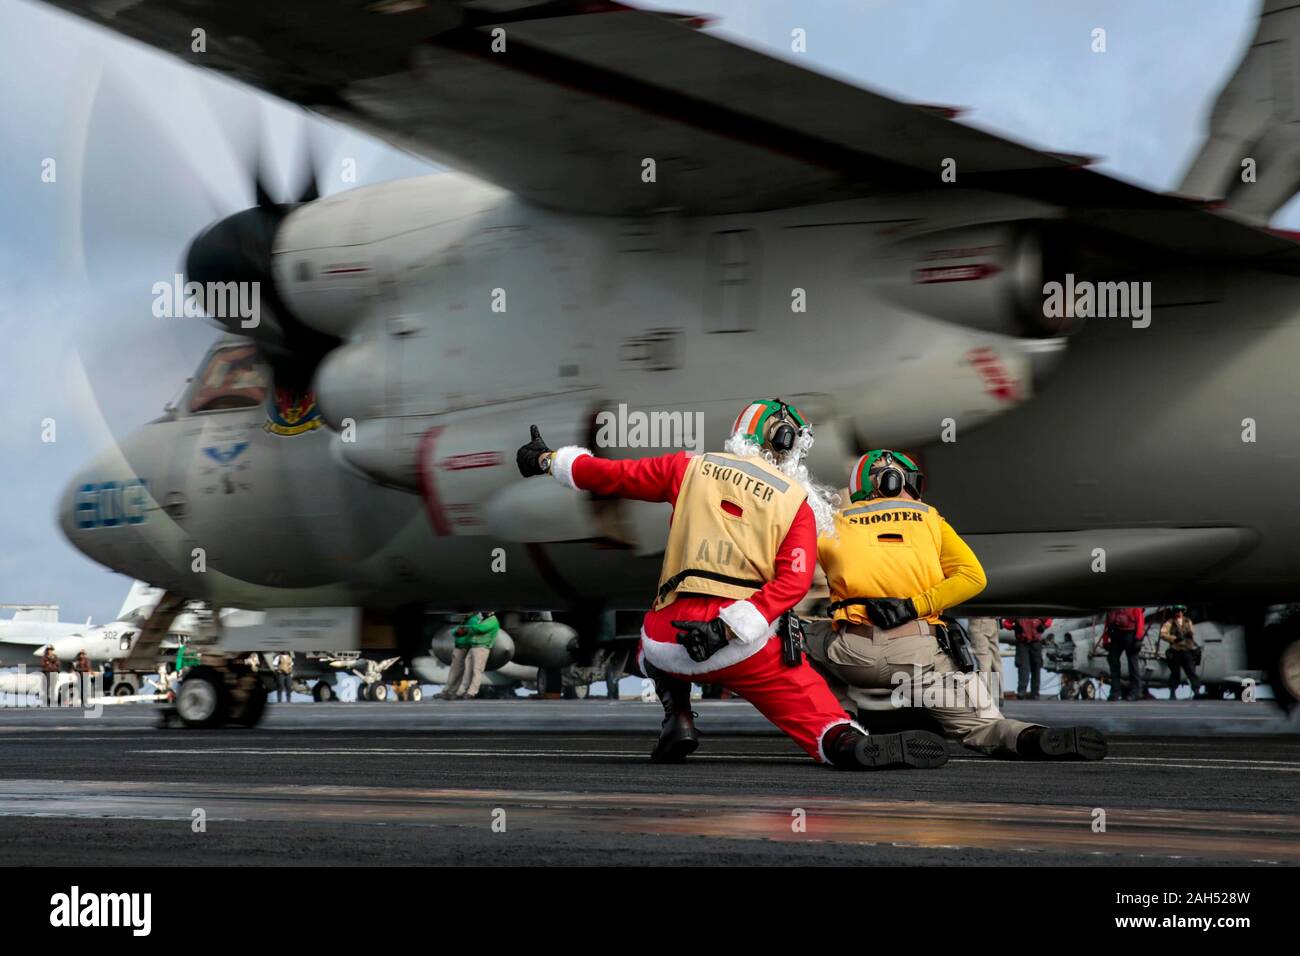 USS Abraham Lincoln, United States. 24 December, 2019. A U.S. Navy sailor dressed as Santa Claus directs an E-2D Hawkeye aircraft on the flight deck of the Nimitz-class aircraft carrier USS Abraham Lincoln during operations on Christmas Eve December 24, 2019 in the South China Sea.  Credit: Michael Singley/U.S. Navy/Alamy Live News Stock Photo